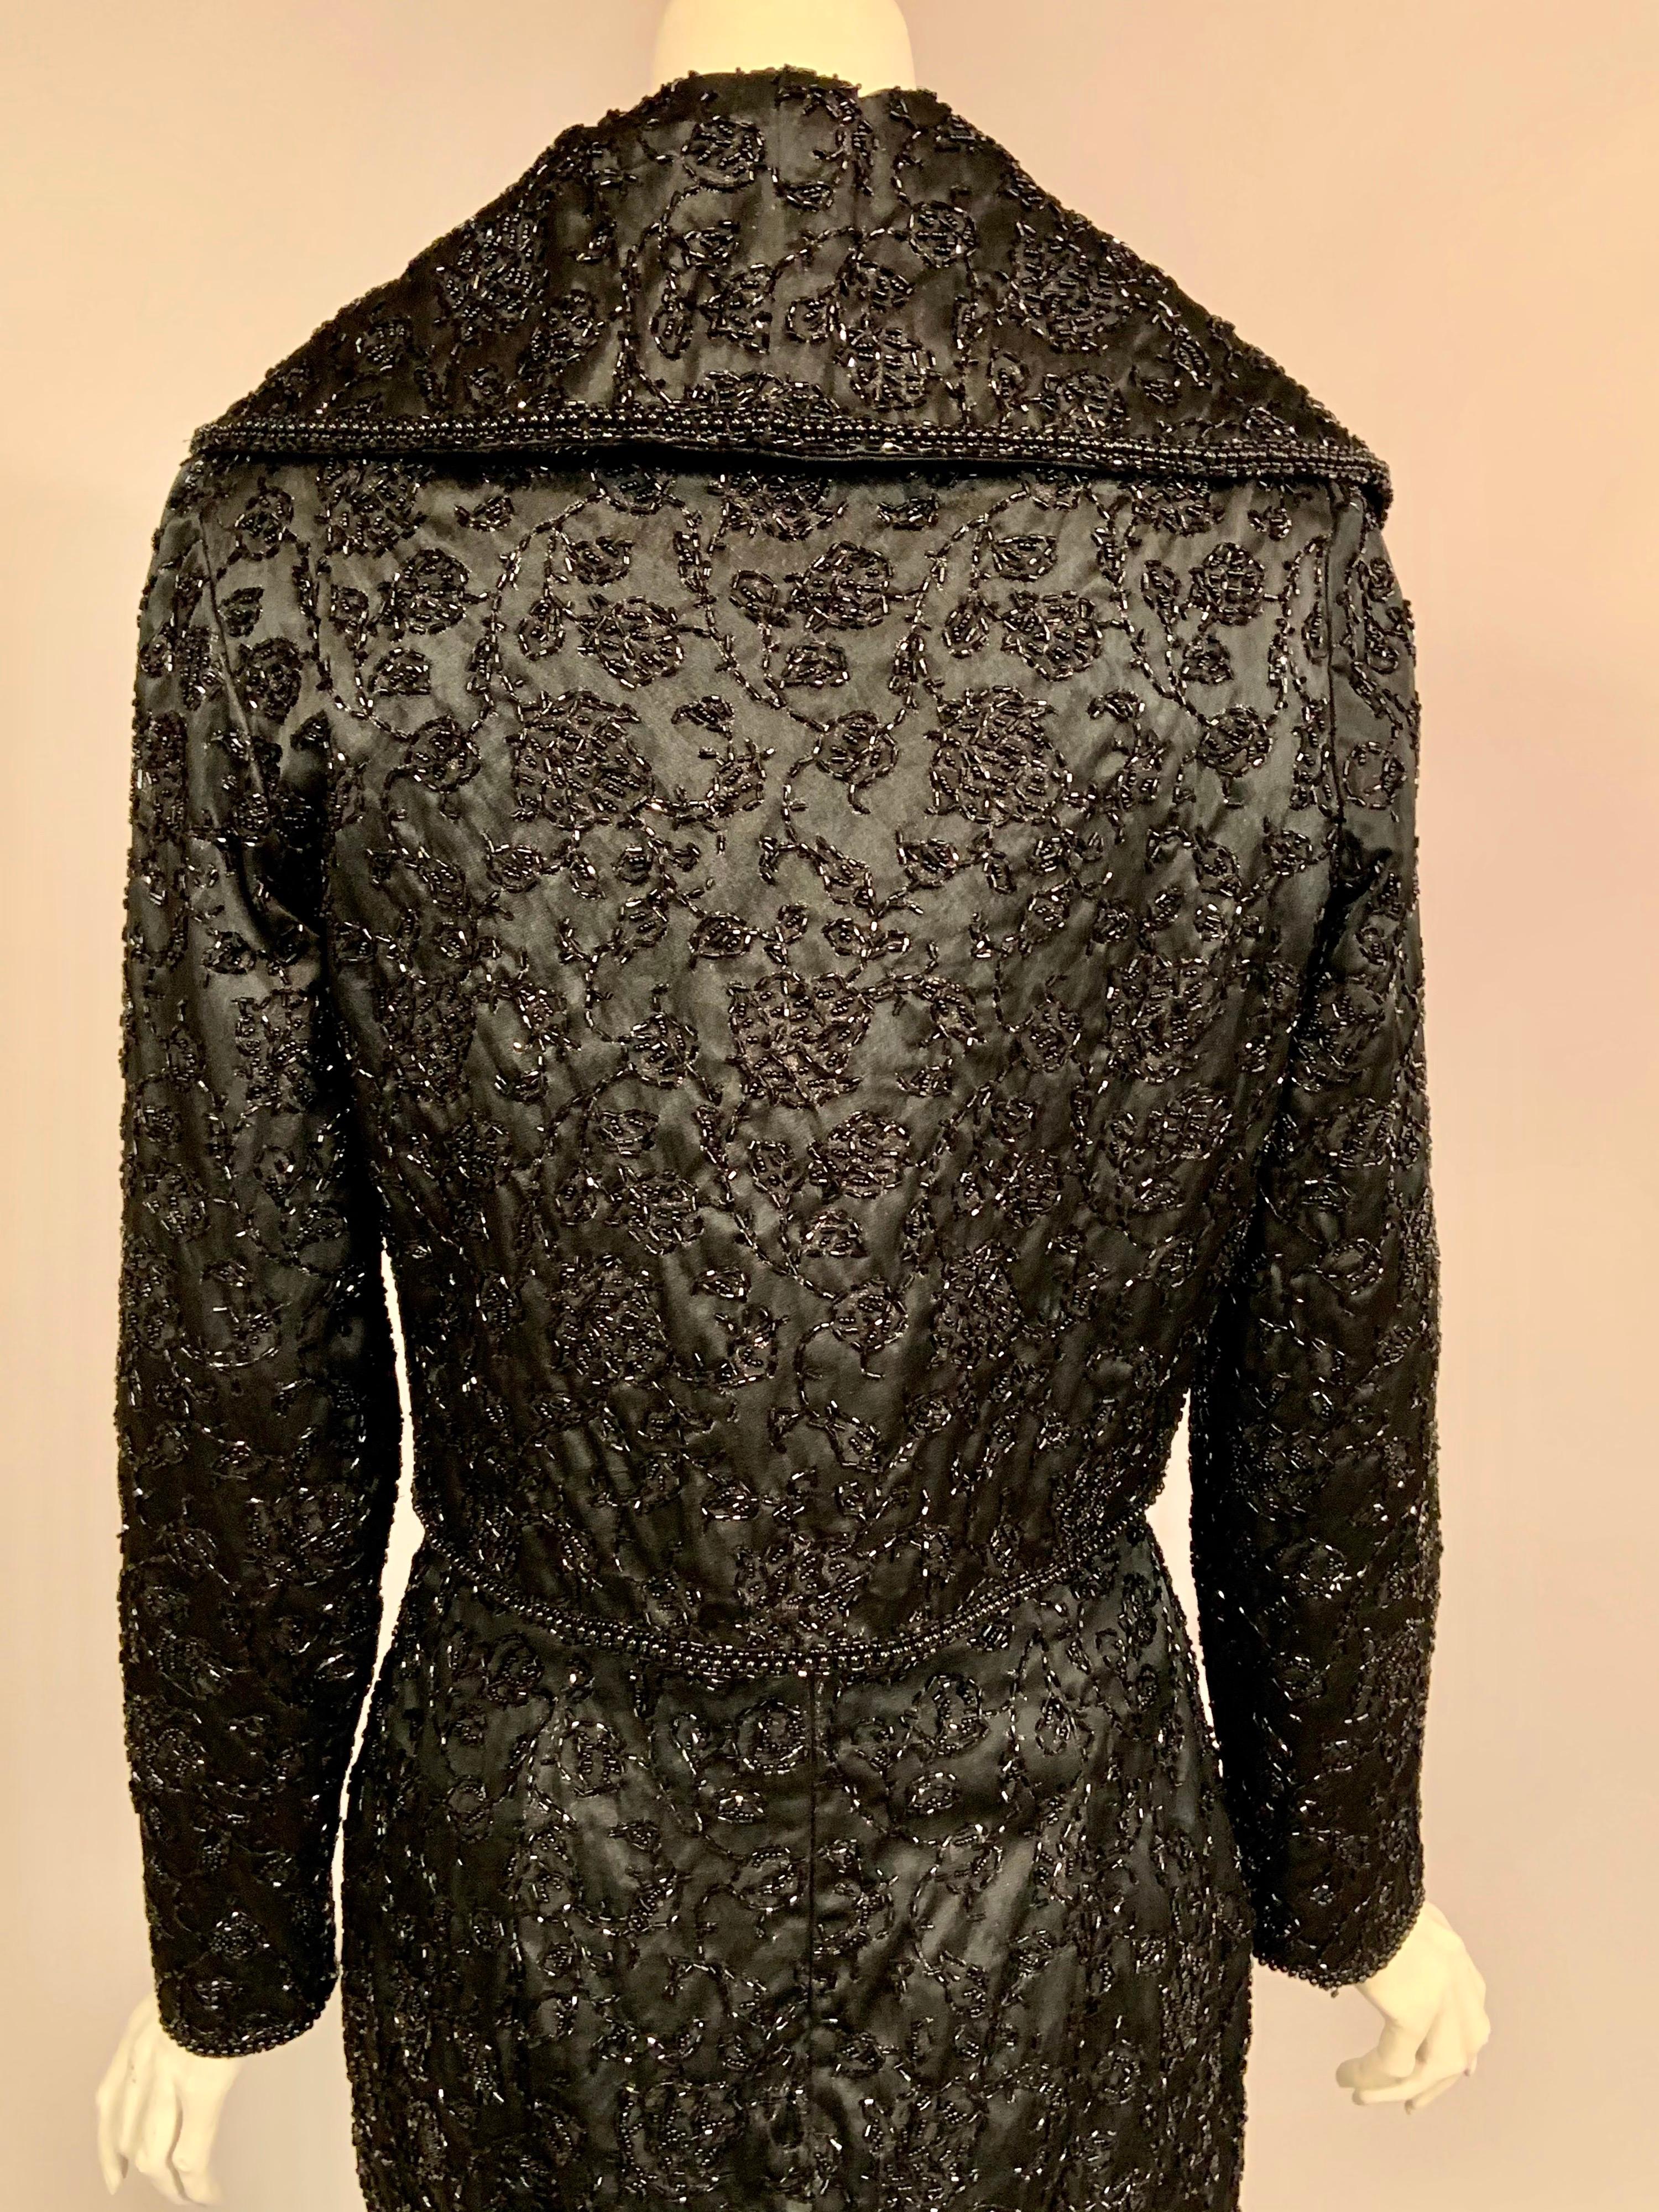 Elaborately Beaded Strapless Black Cocktail Dress and Jacket  circa 1950 For Sale 8